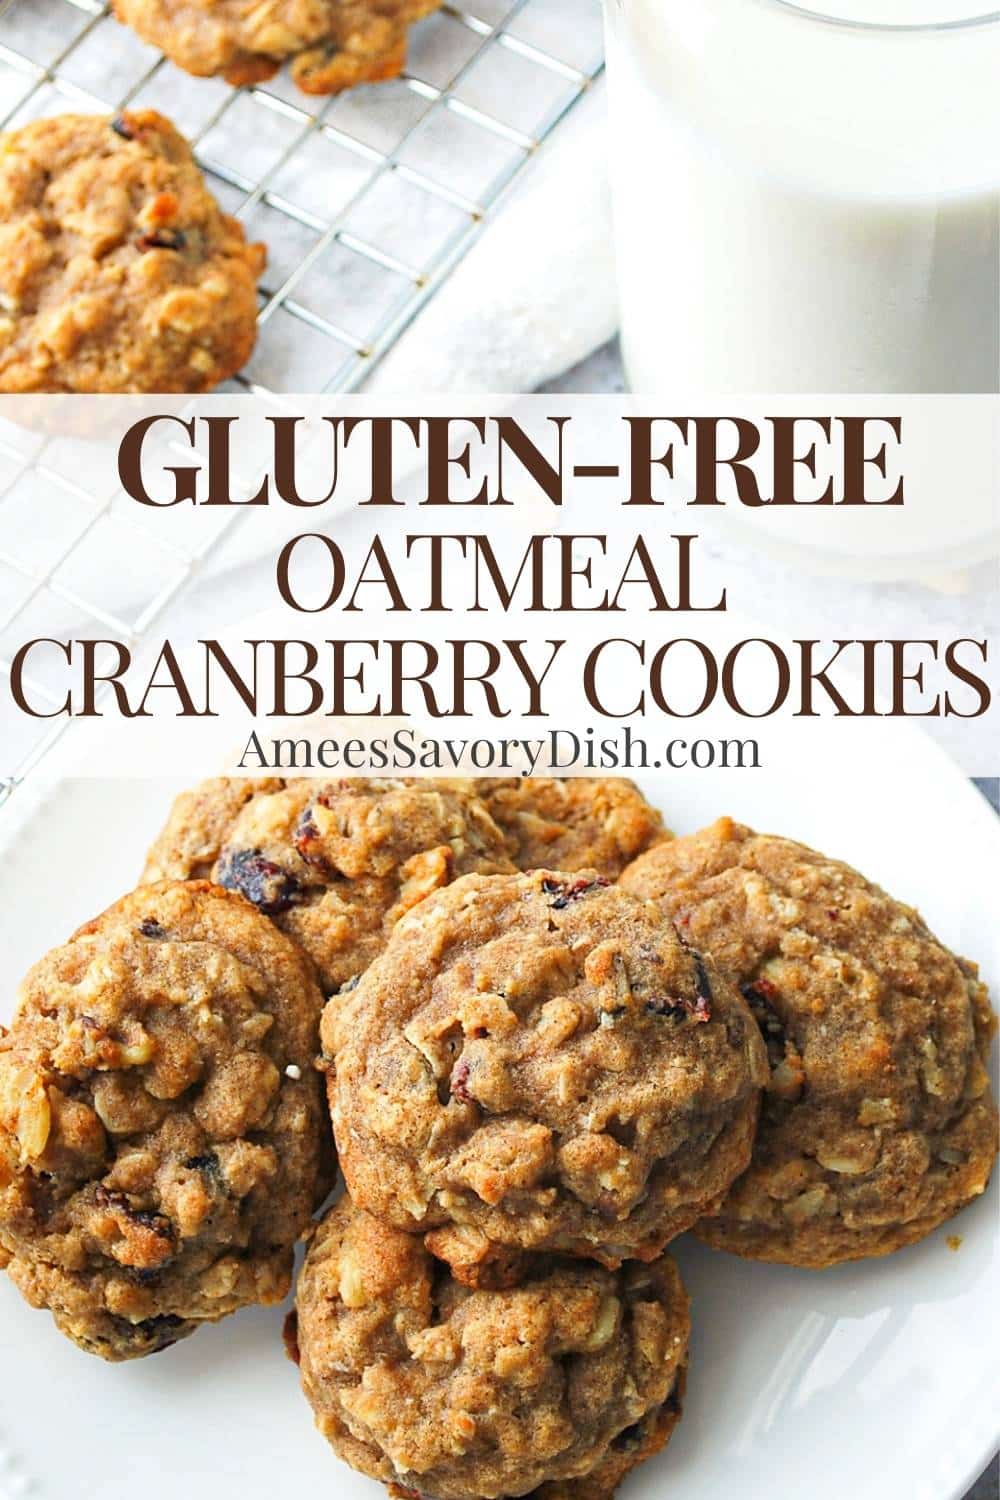 You'll love these soft, chewy gluten-free oatmeal cranberry cookies with crunchy walnuts. Easy and delicious! via @Ameessavorydish